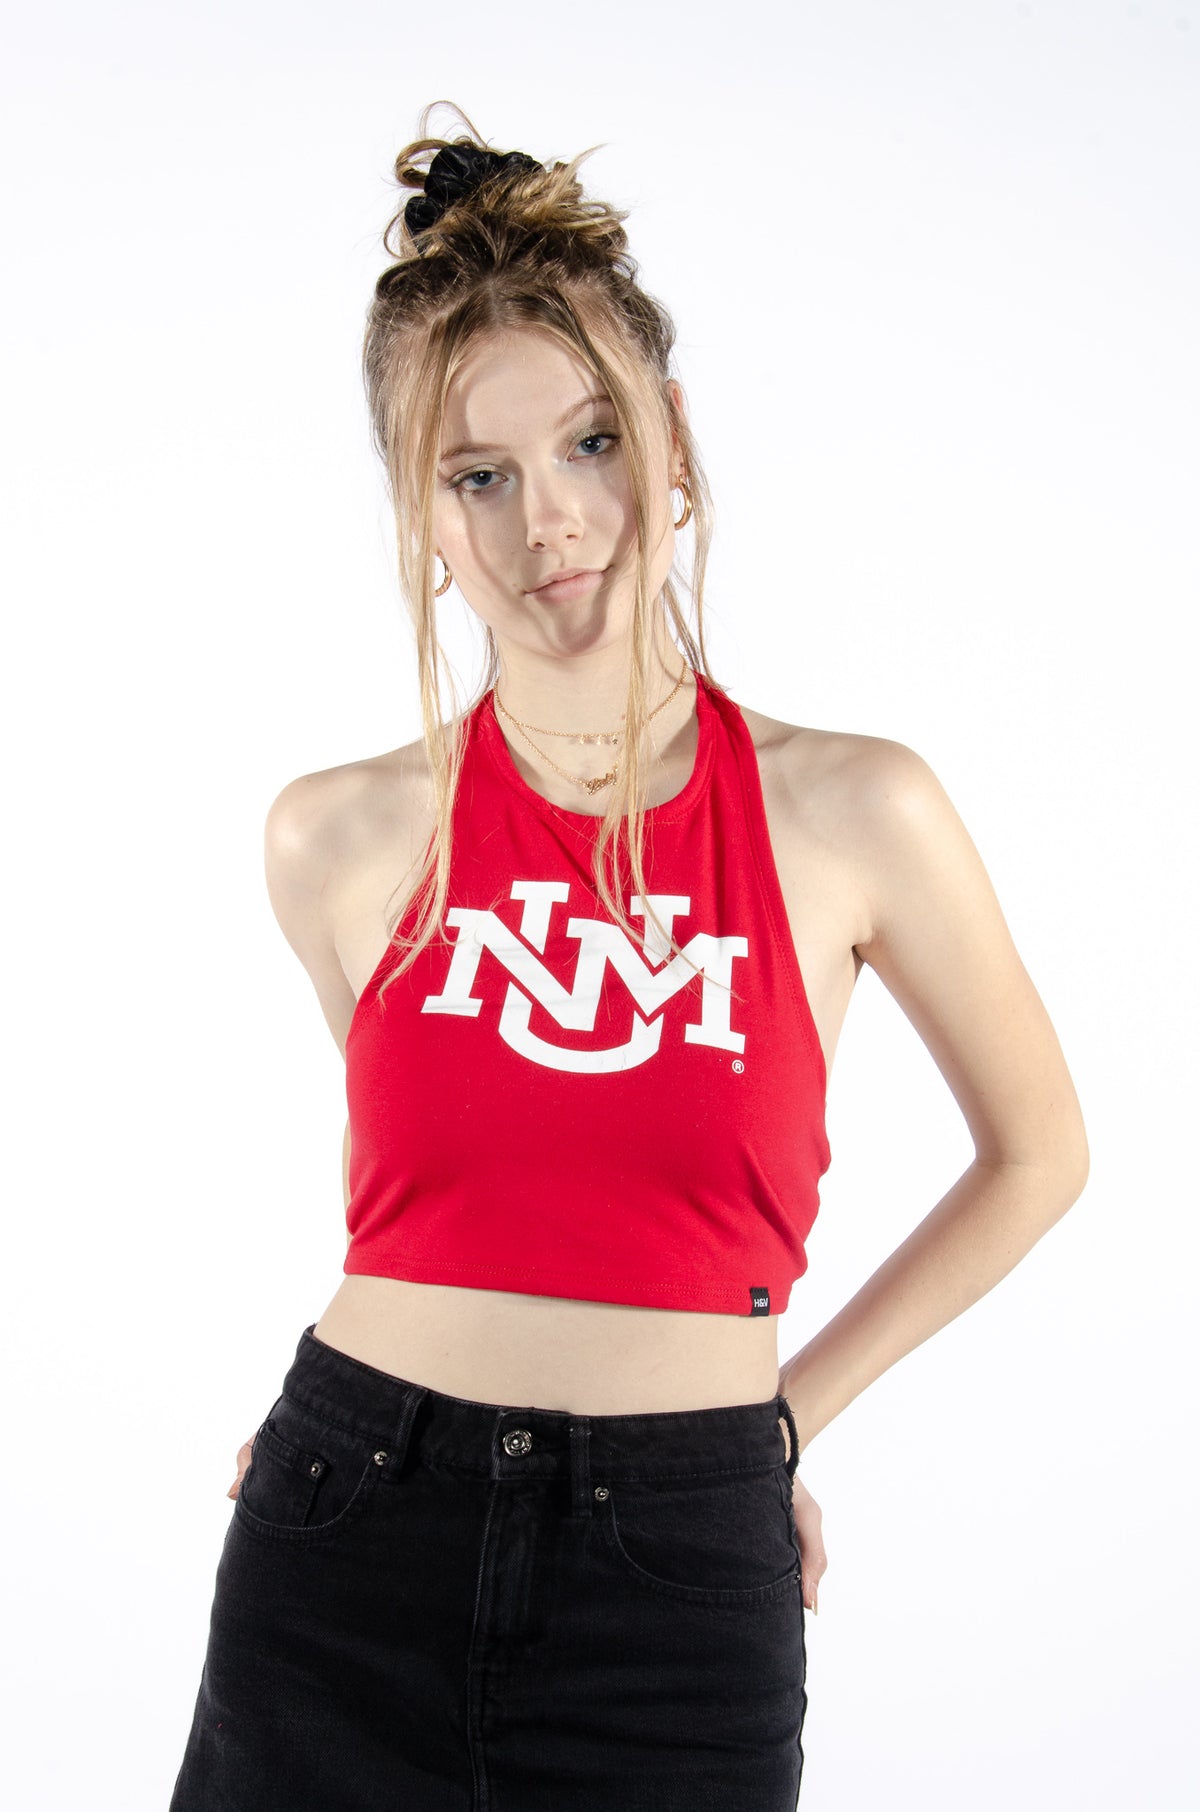 UNM Adjustable Halter Top - Hype and Vice